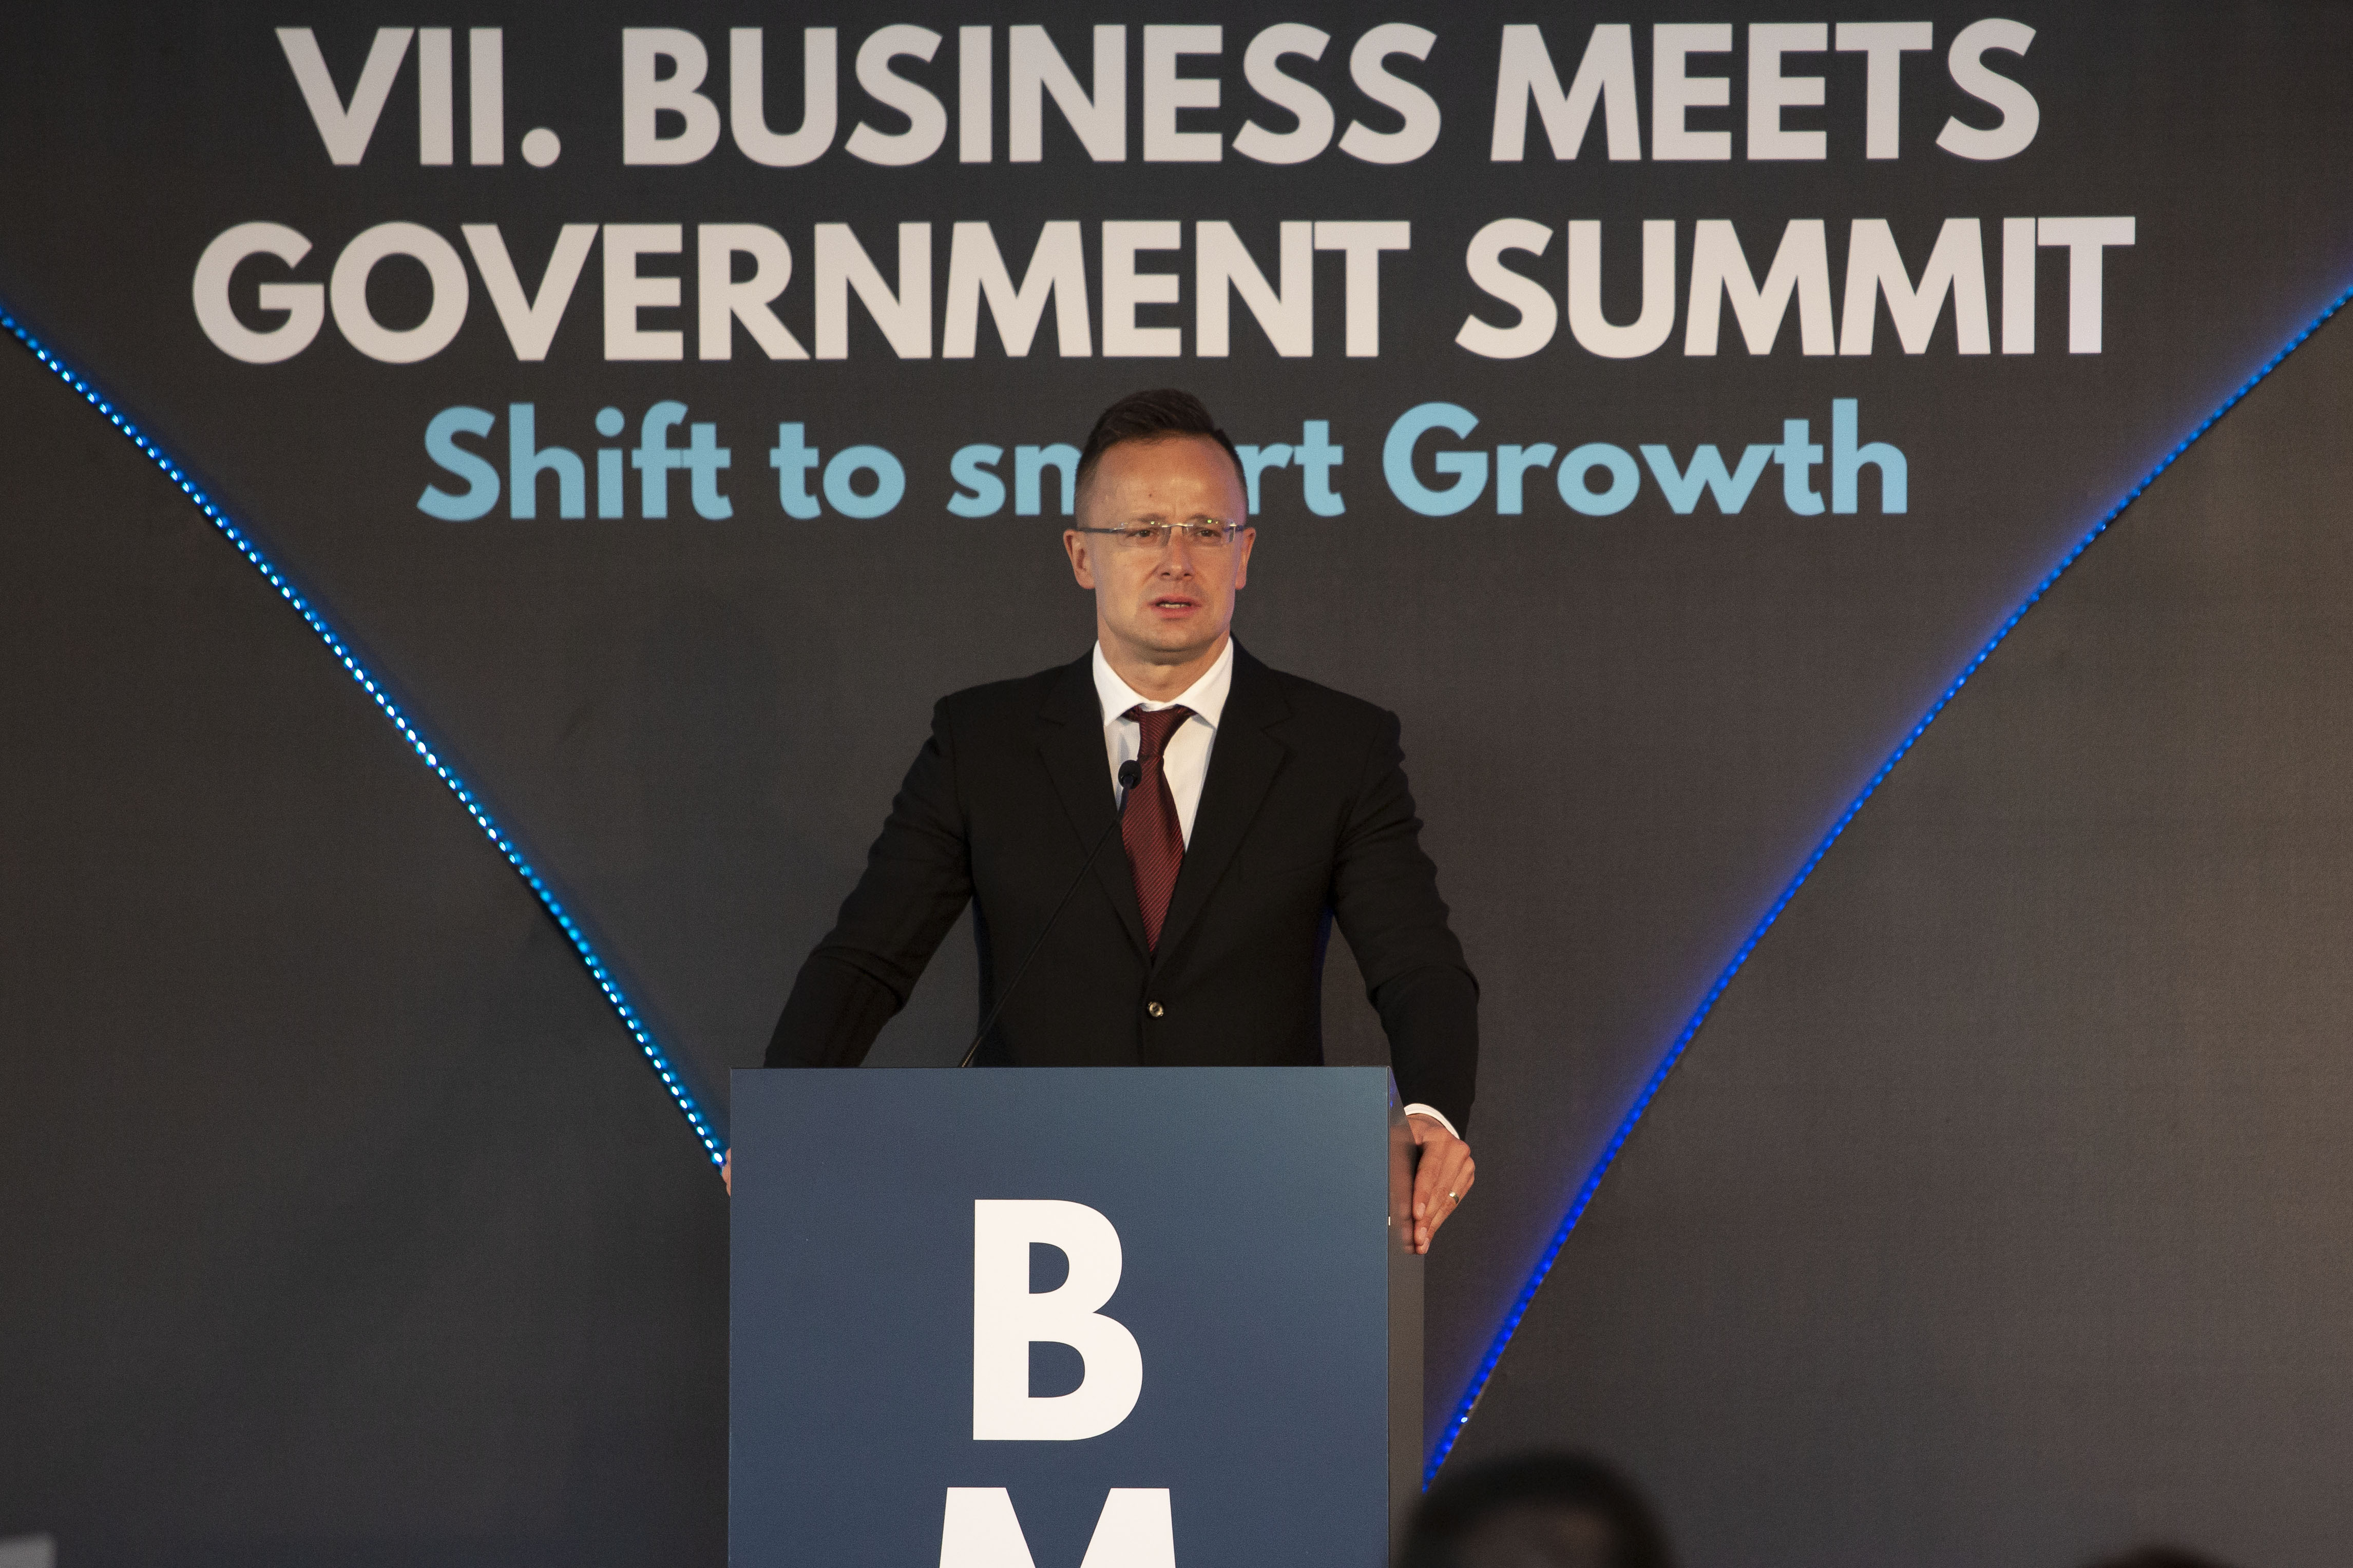 Business Meets Government Returns Fully in Person for 7th Su...